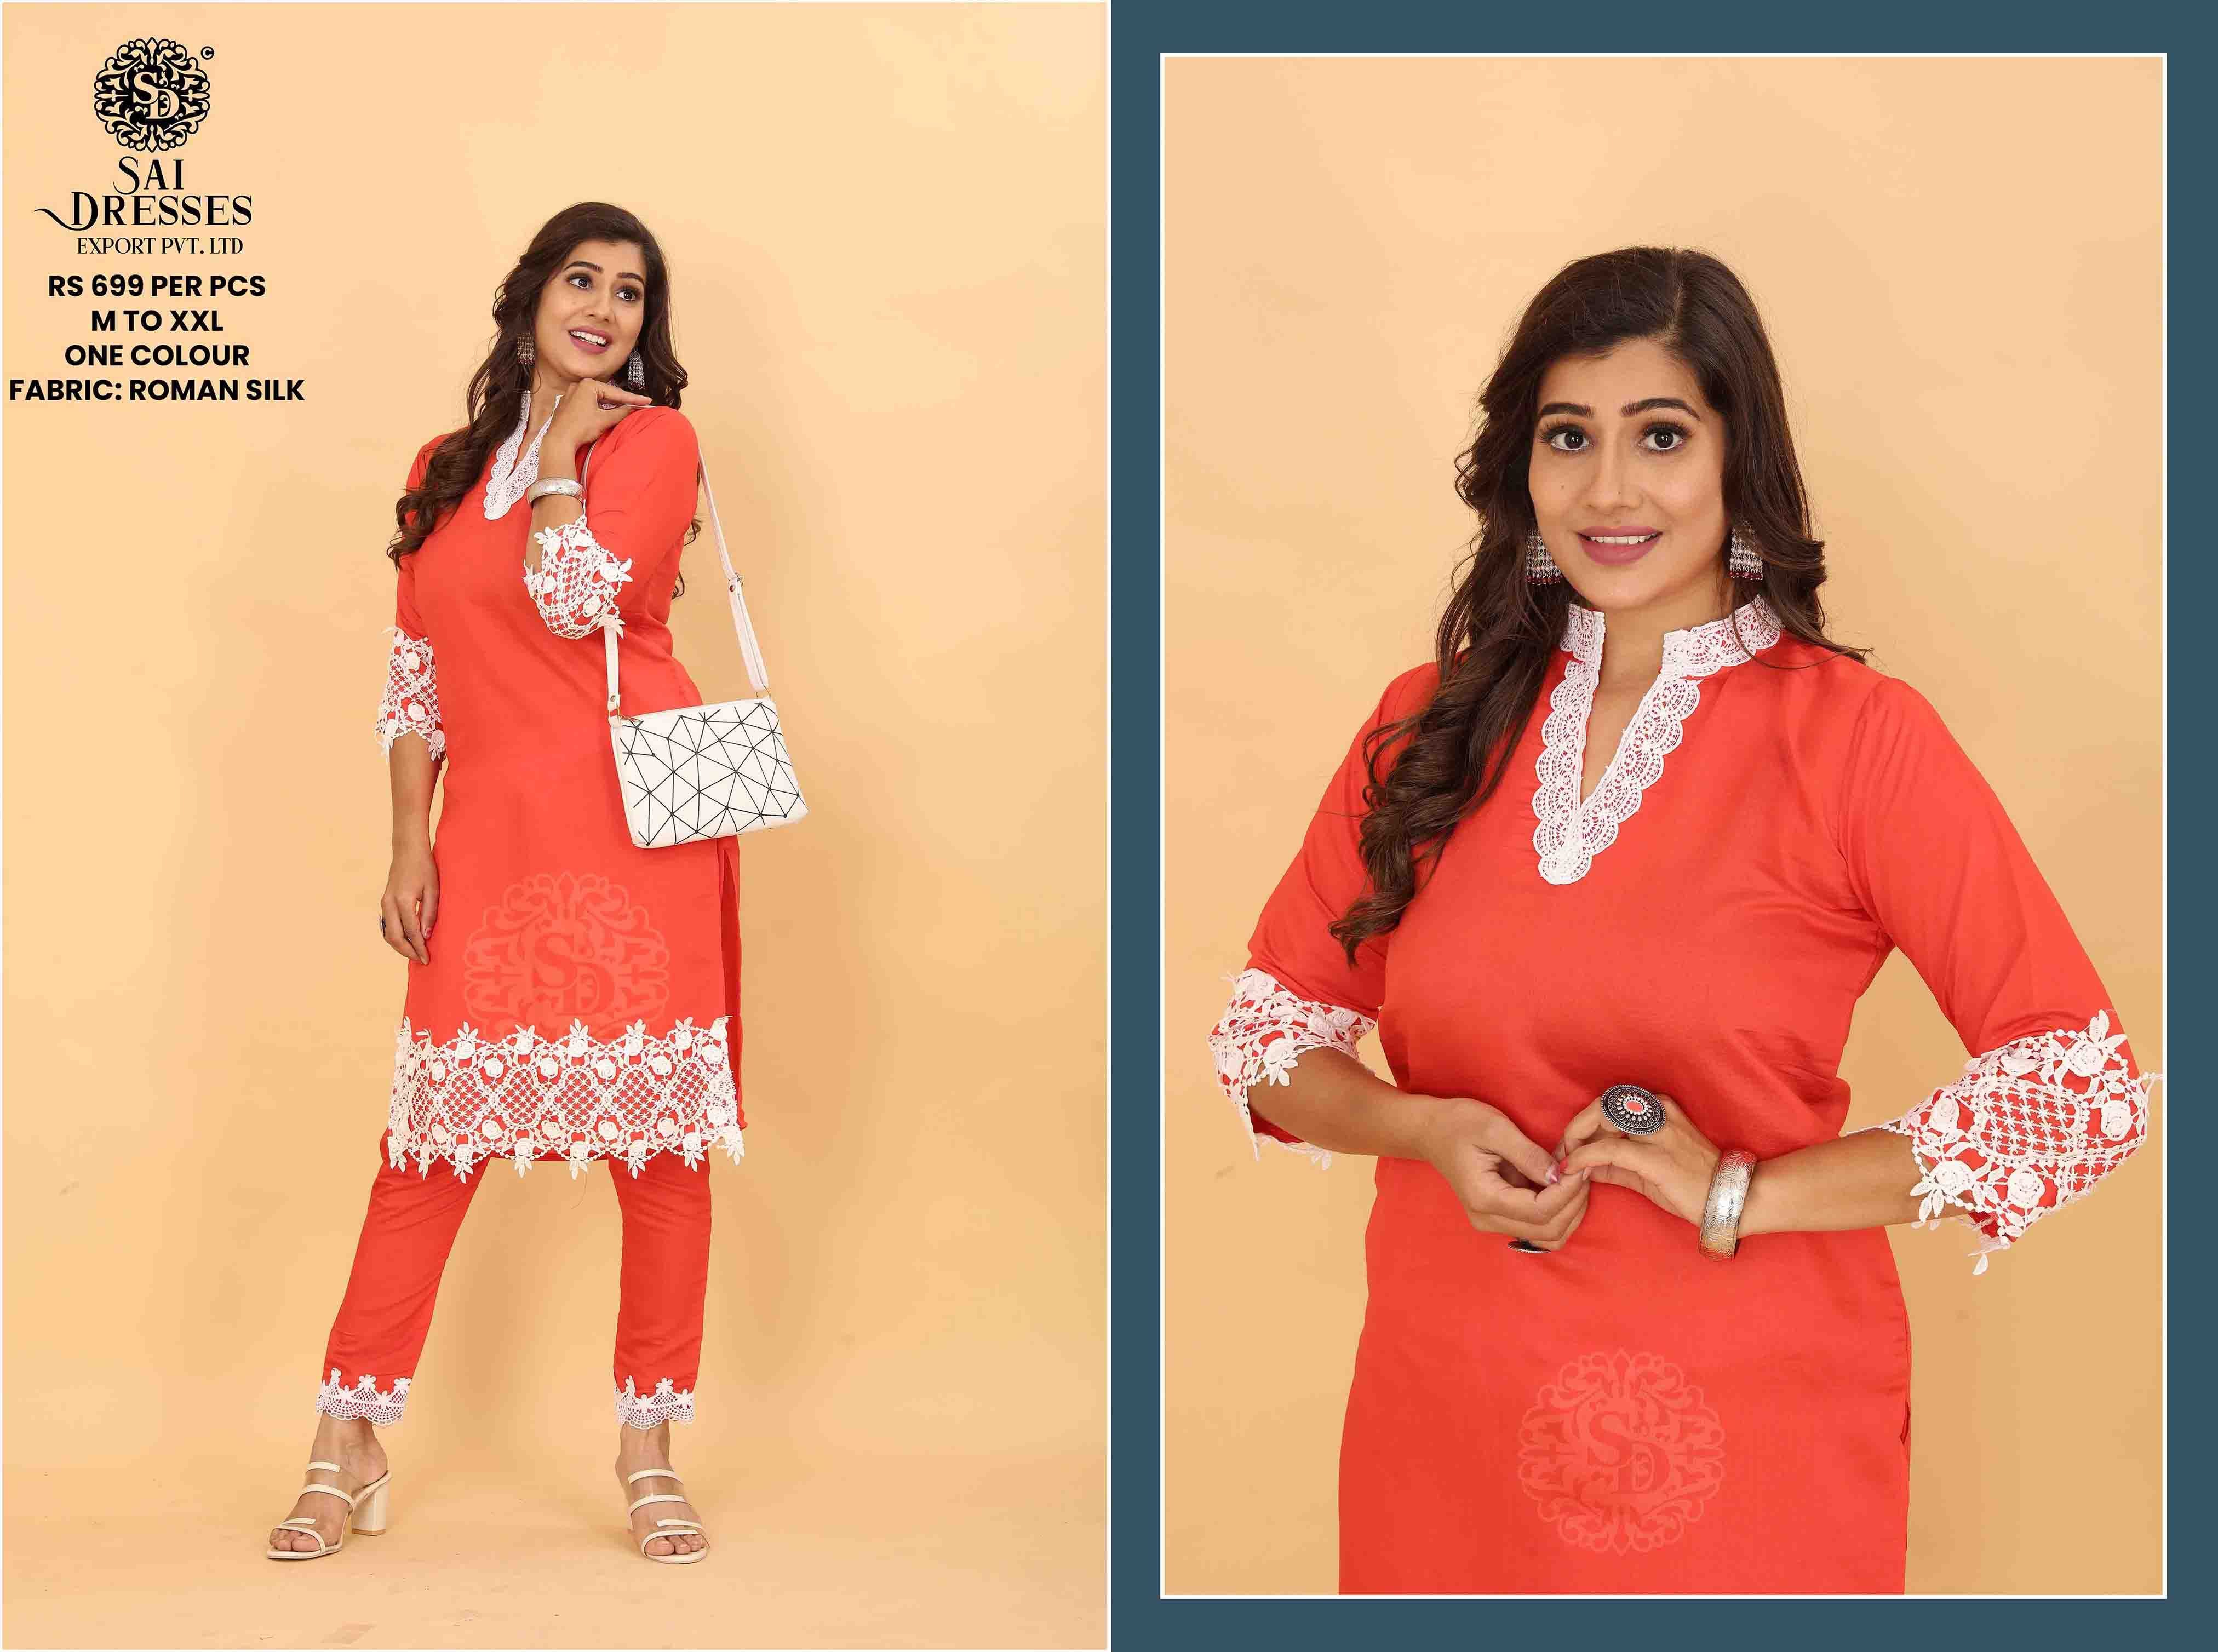 SAI DRESSES PRESENT D.NO SD 5004 READY TO TRENDY WEAR ROMAN SILK DESIGNER KURTI WITH PANT COMBO COLLECTION IN WHOLESALE RATE IN SURAT